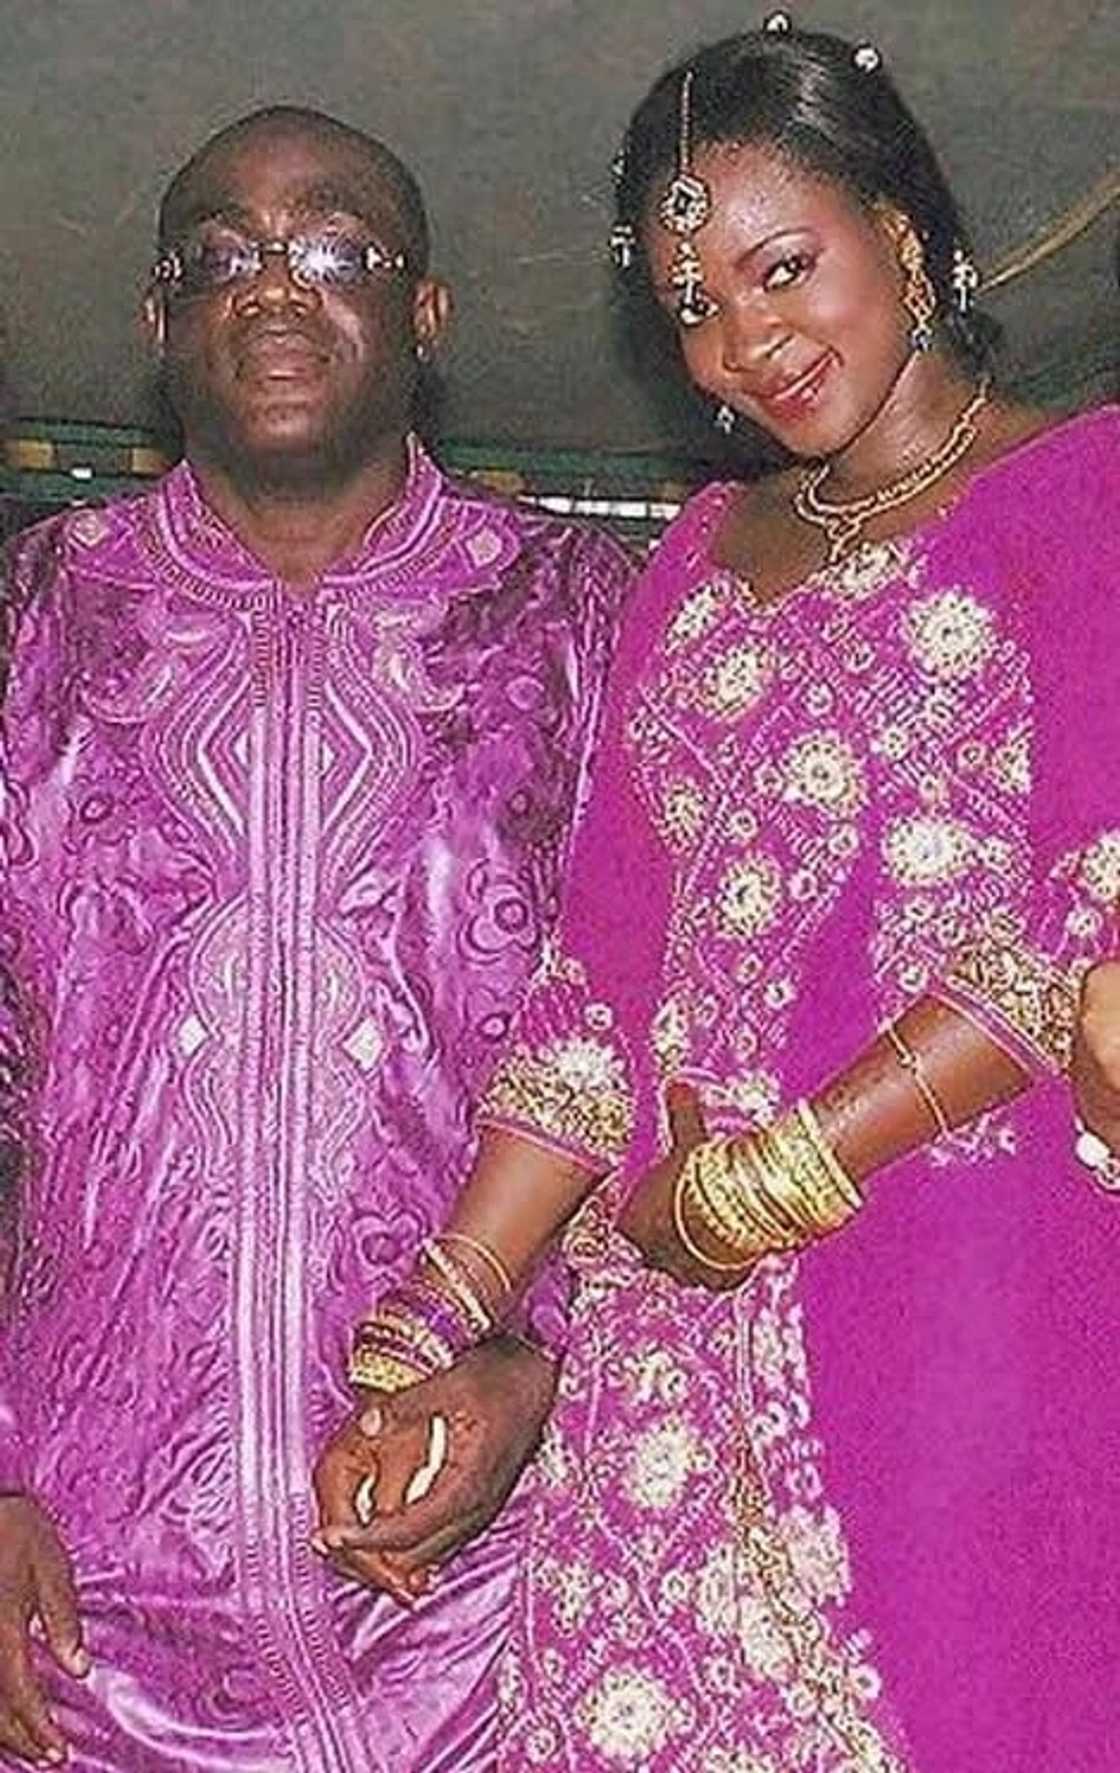 The men who married Ghana's beauty queens